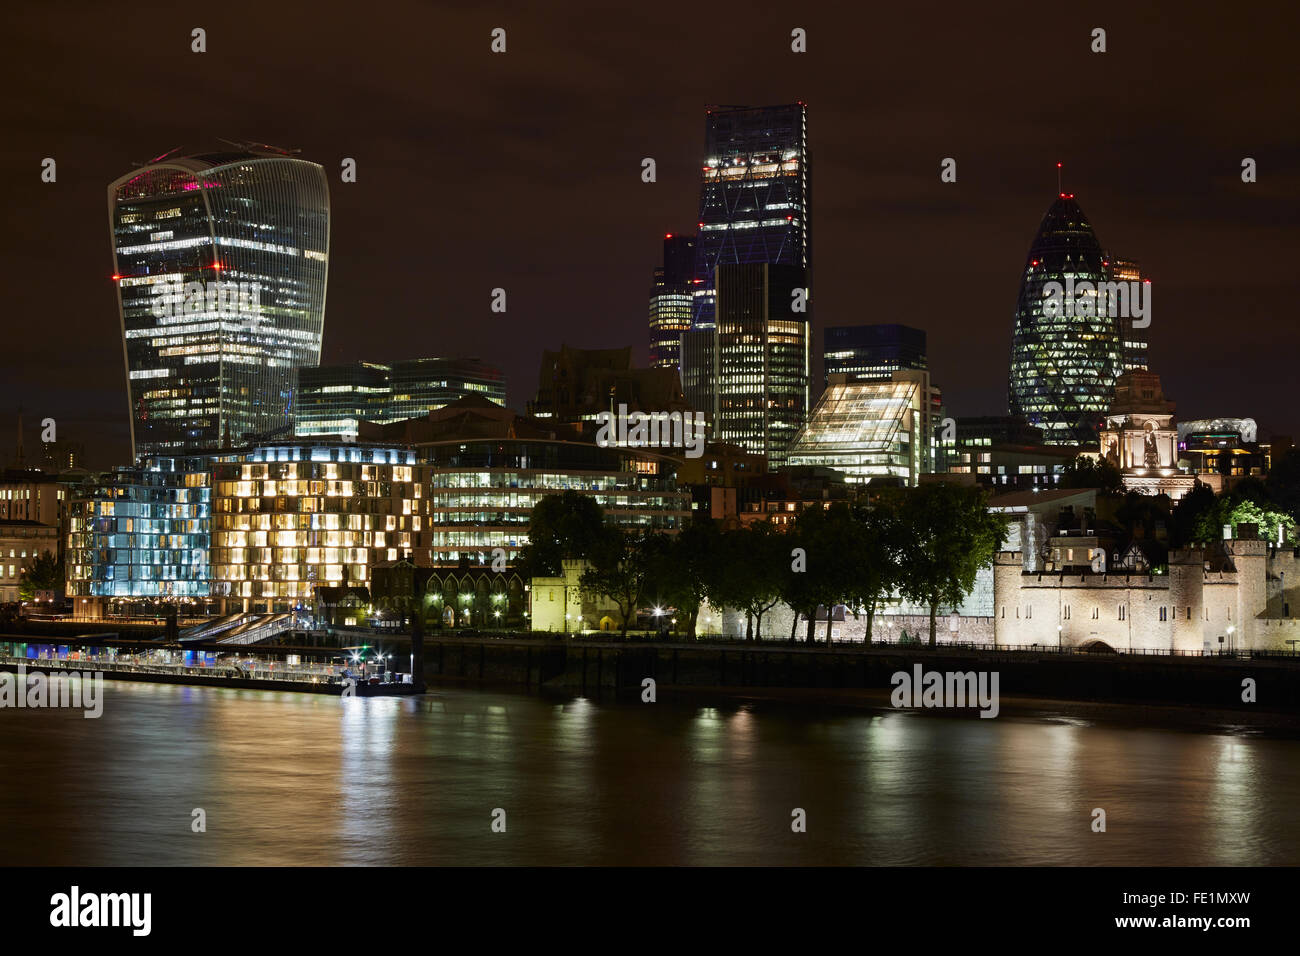 London skyscrapers skyline view illuminated at night with Thames river Stock Photo